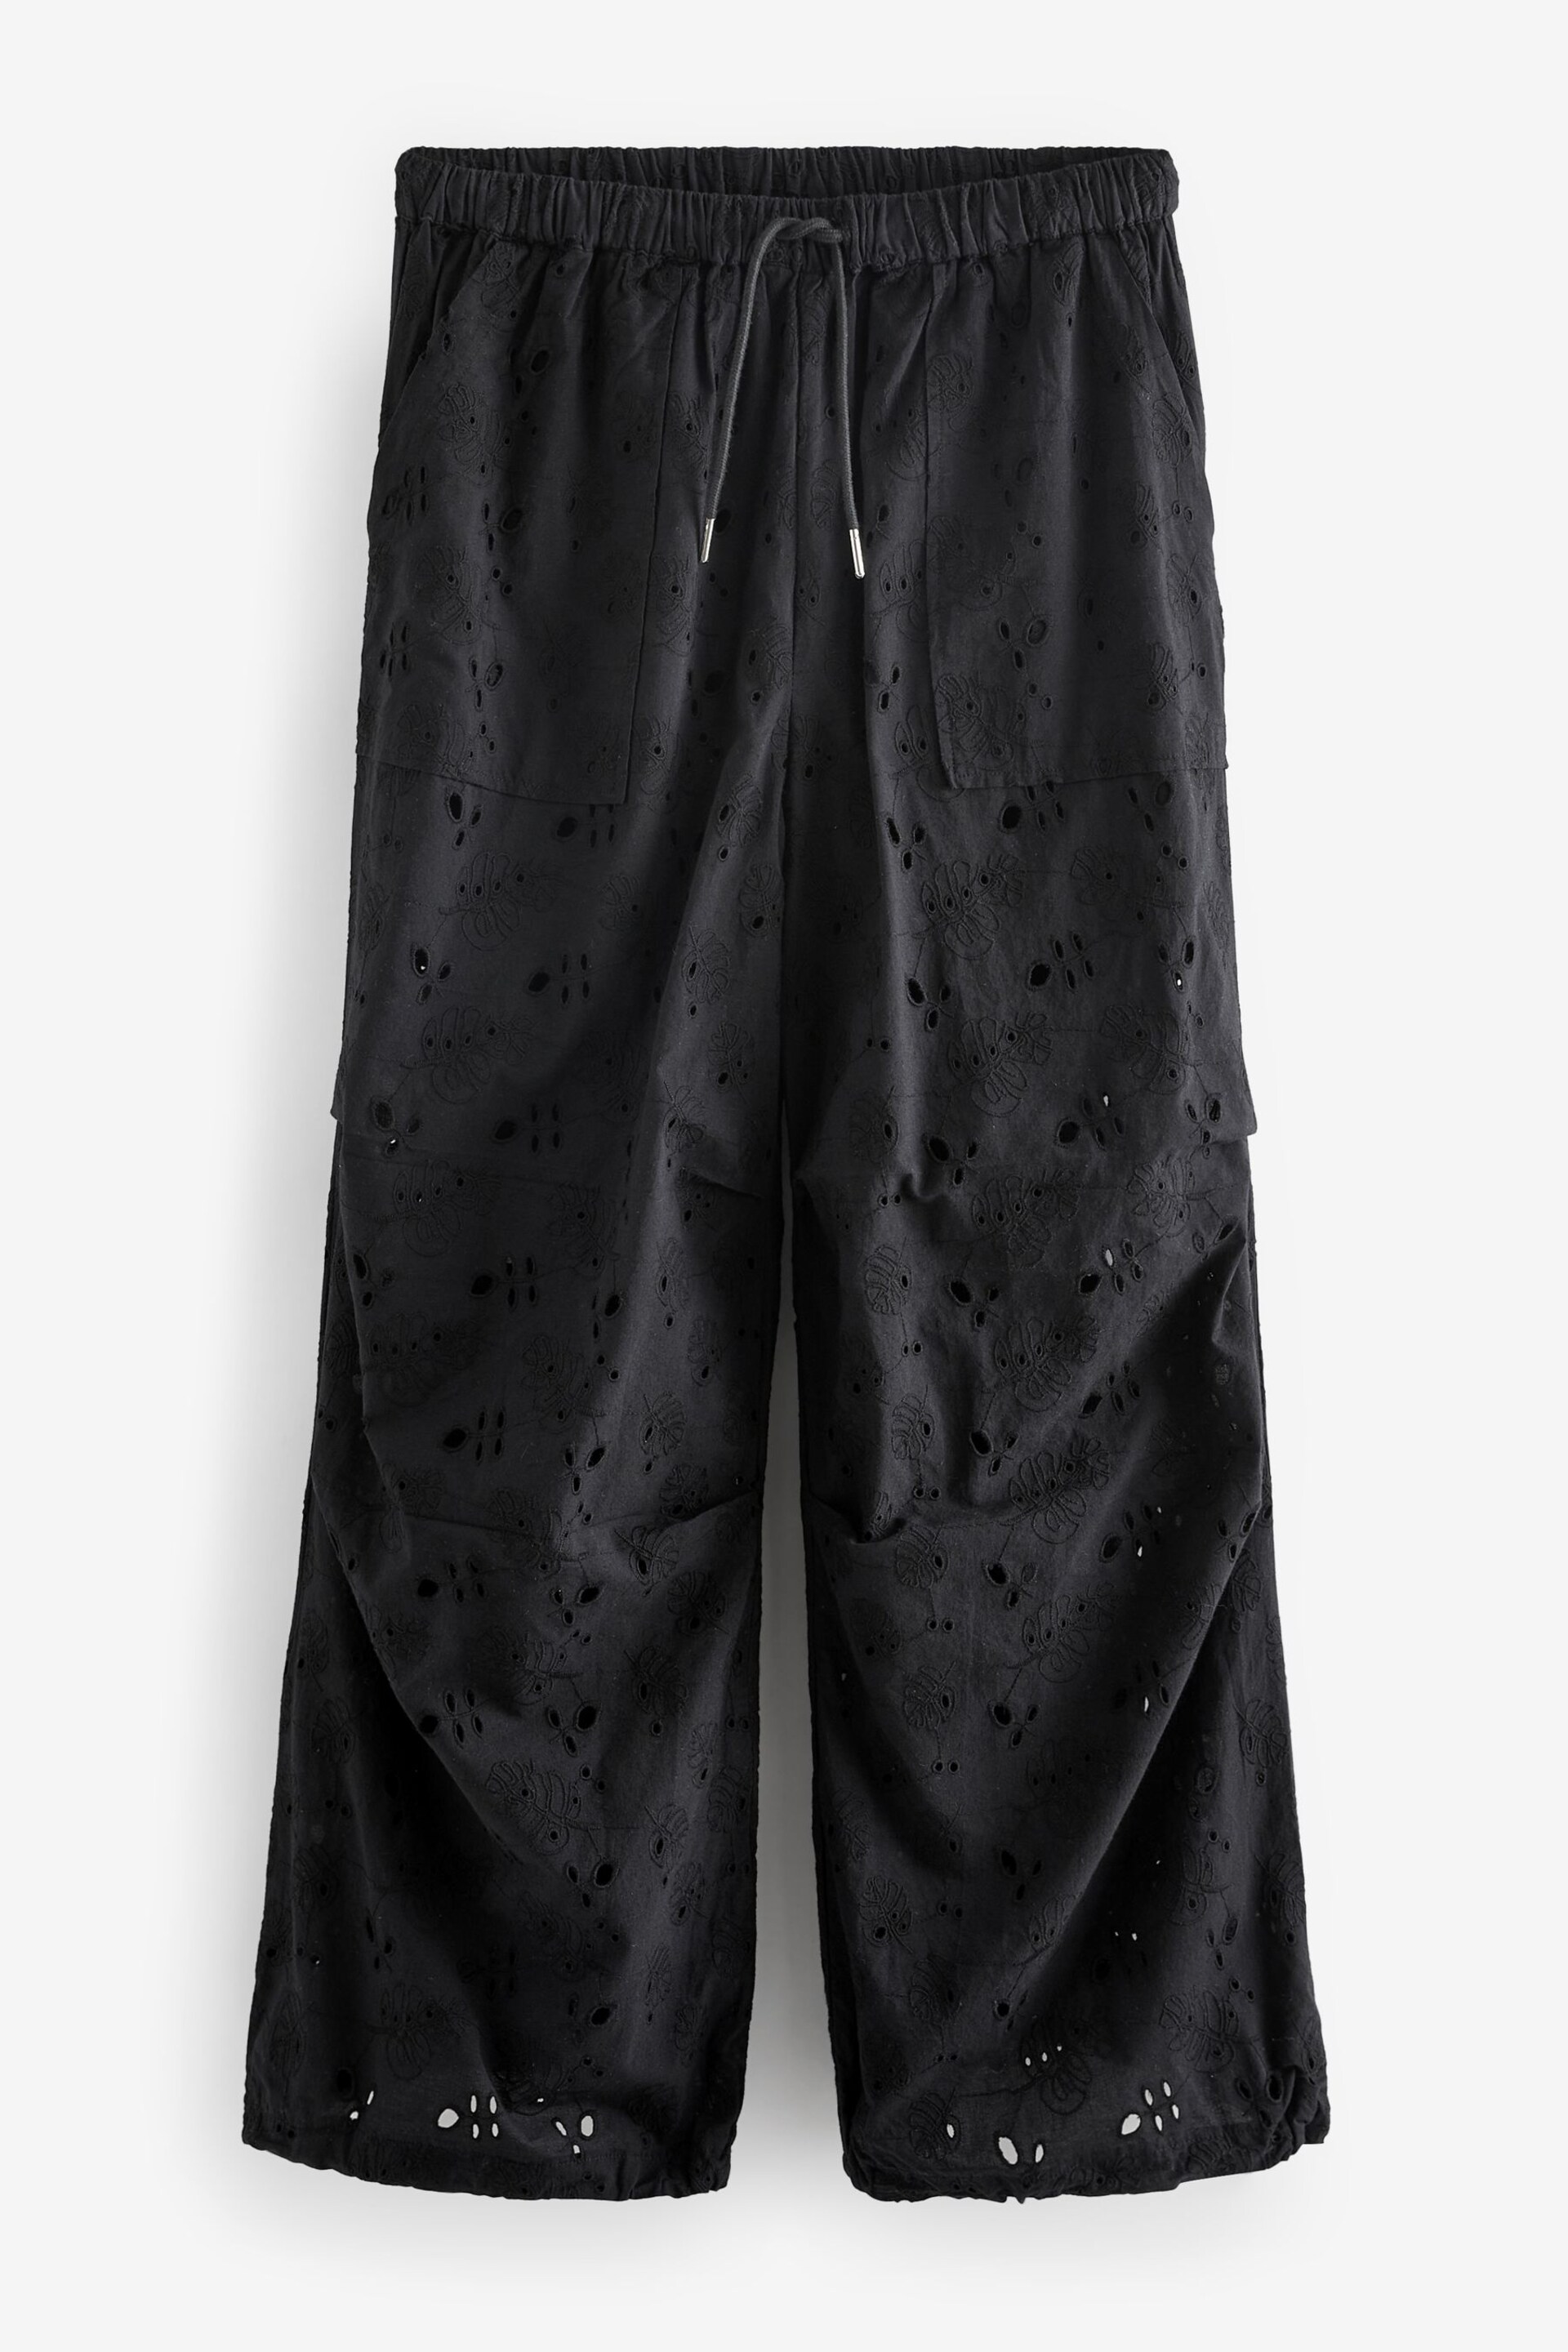 Black 100% Cotton Broderie Cargo Trousers - Image 6 of 8